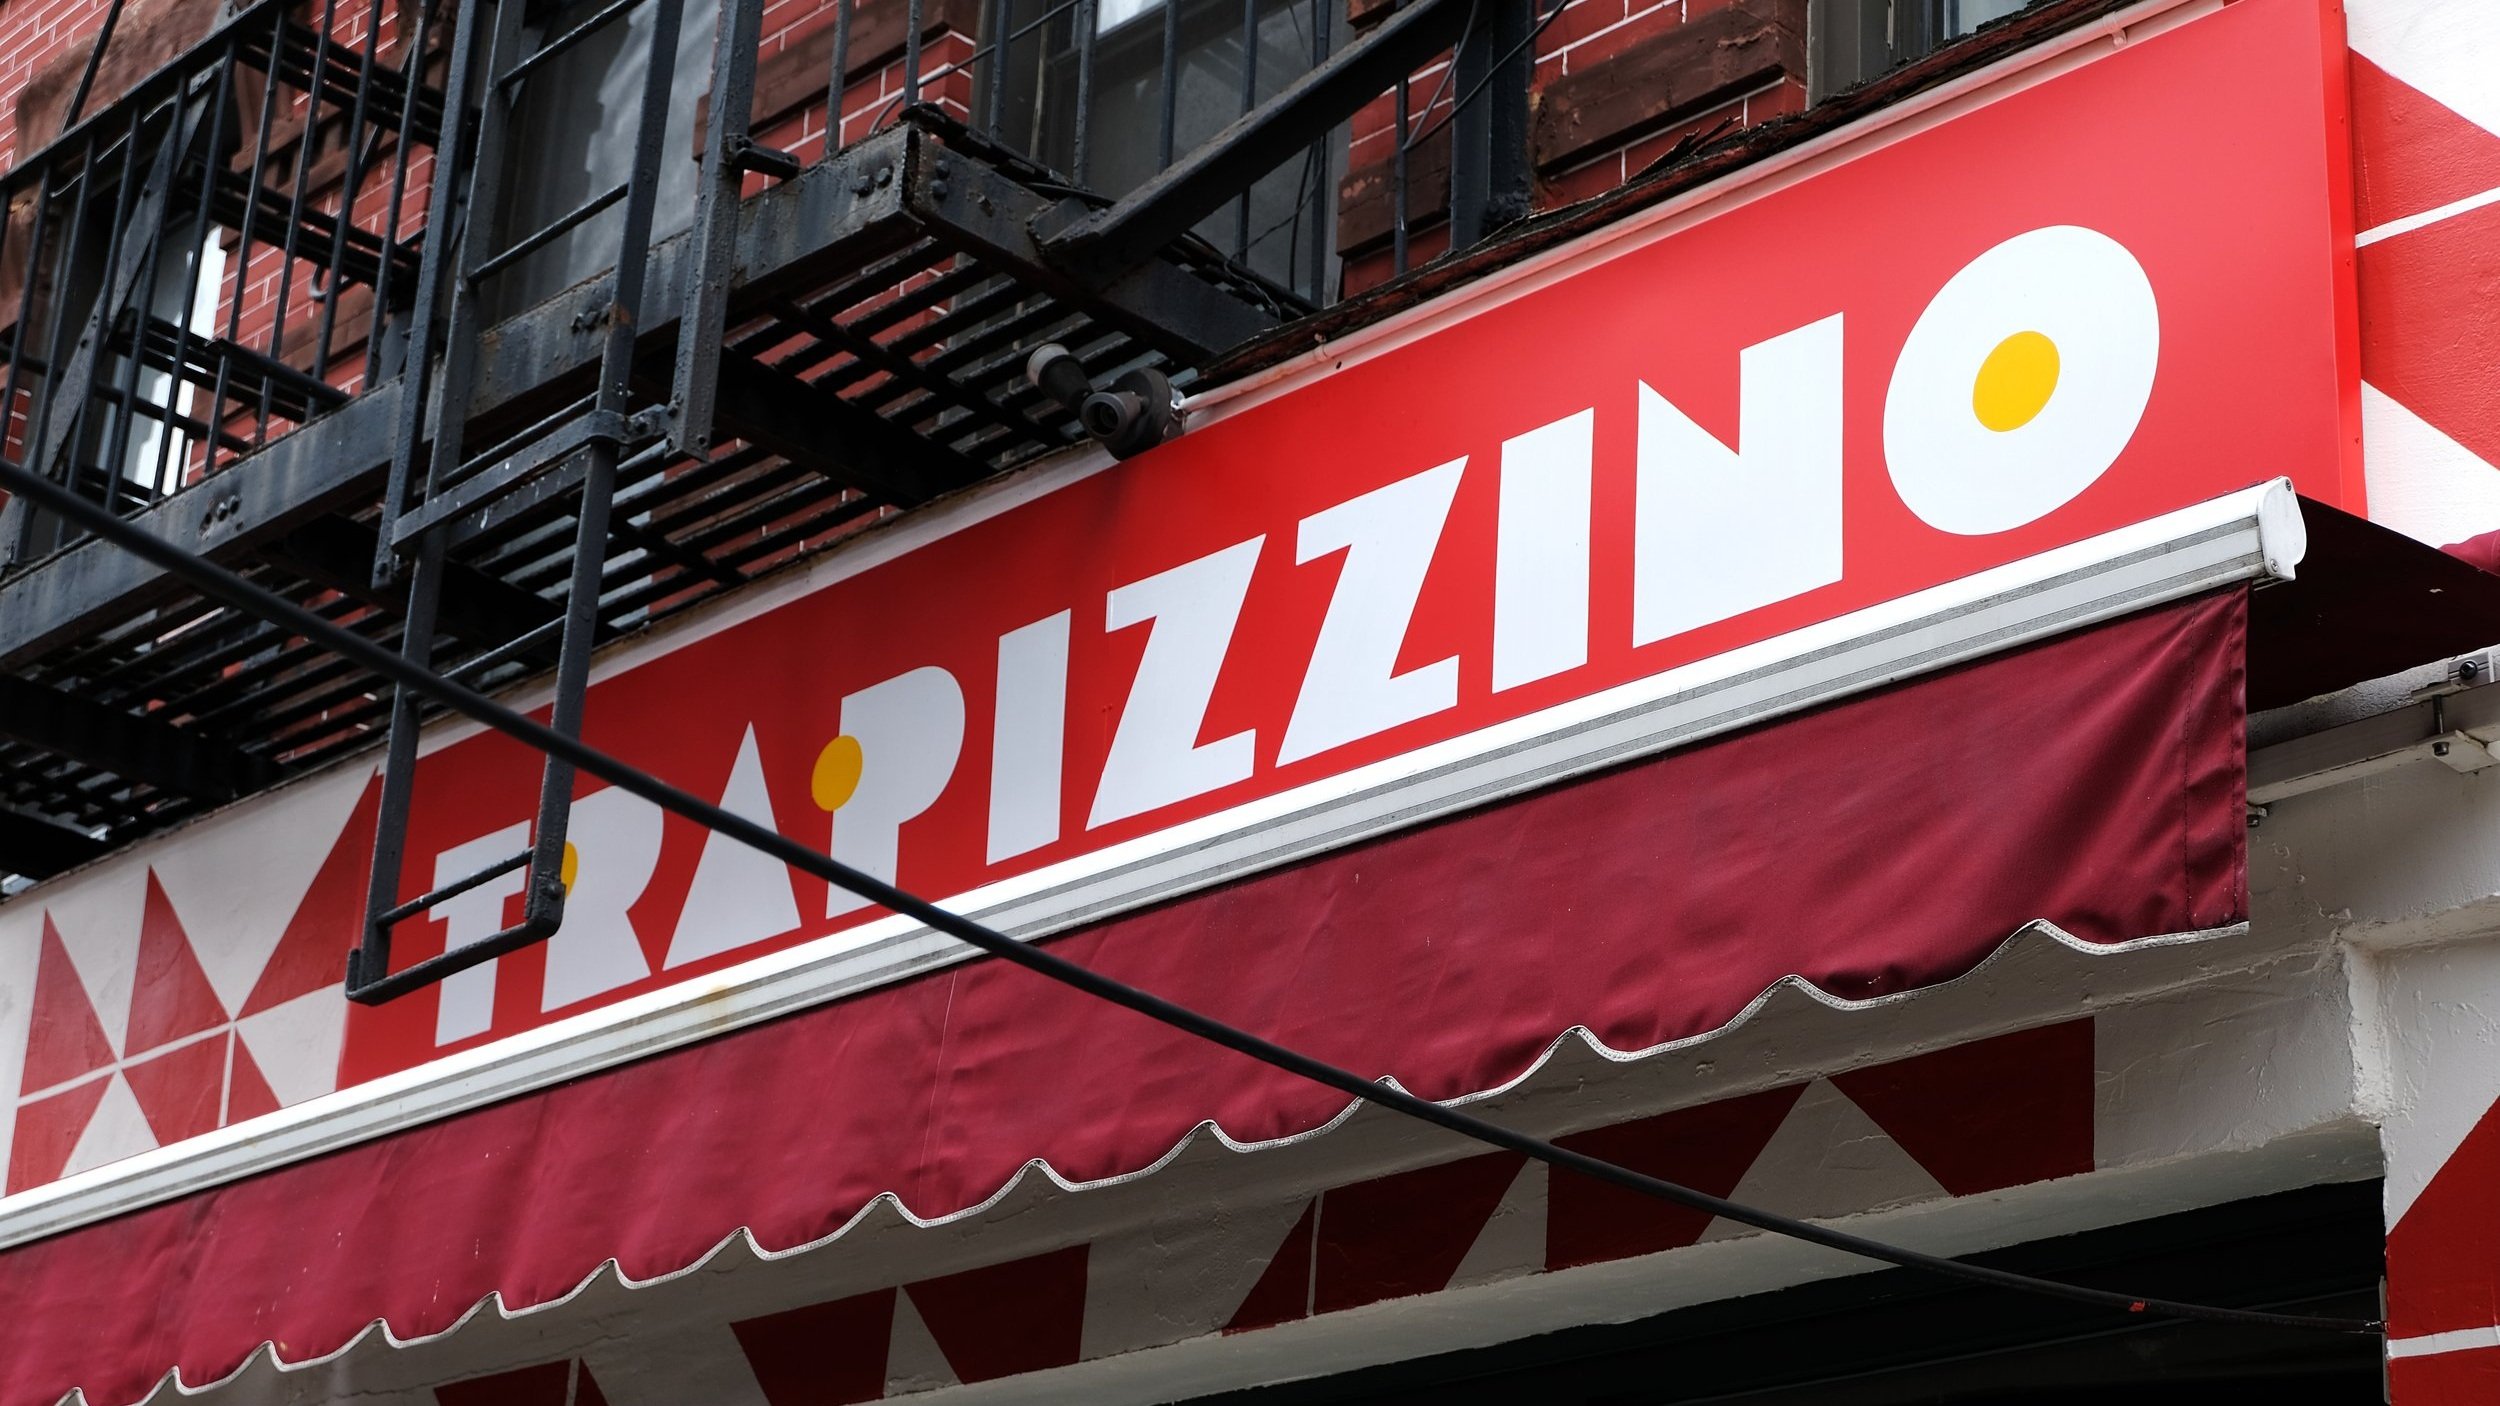  A red storefront sign with white handpainted decorative geometric lettering reading “Trapizzino” 